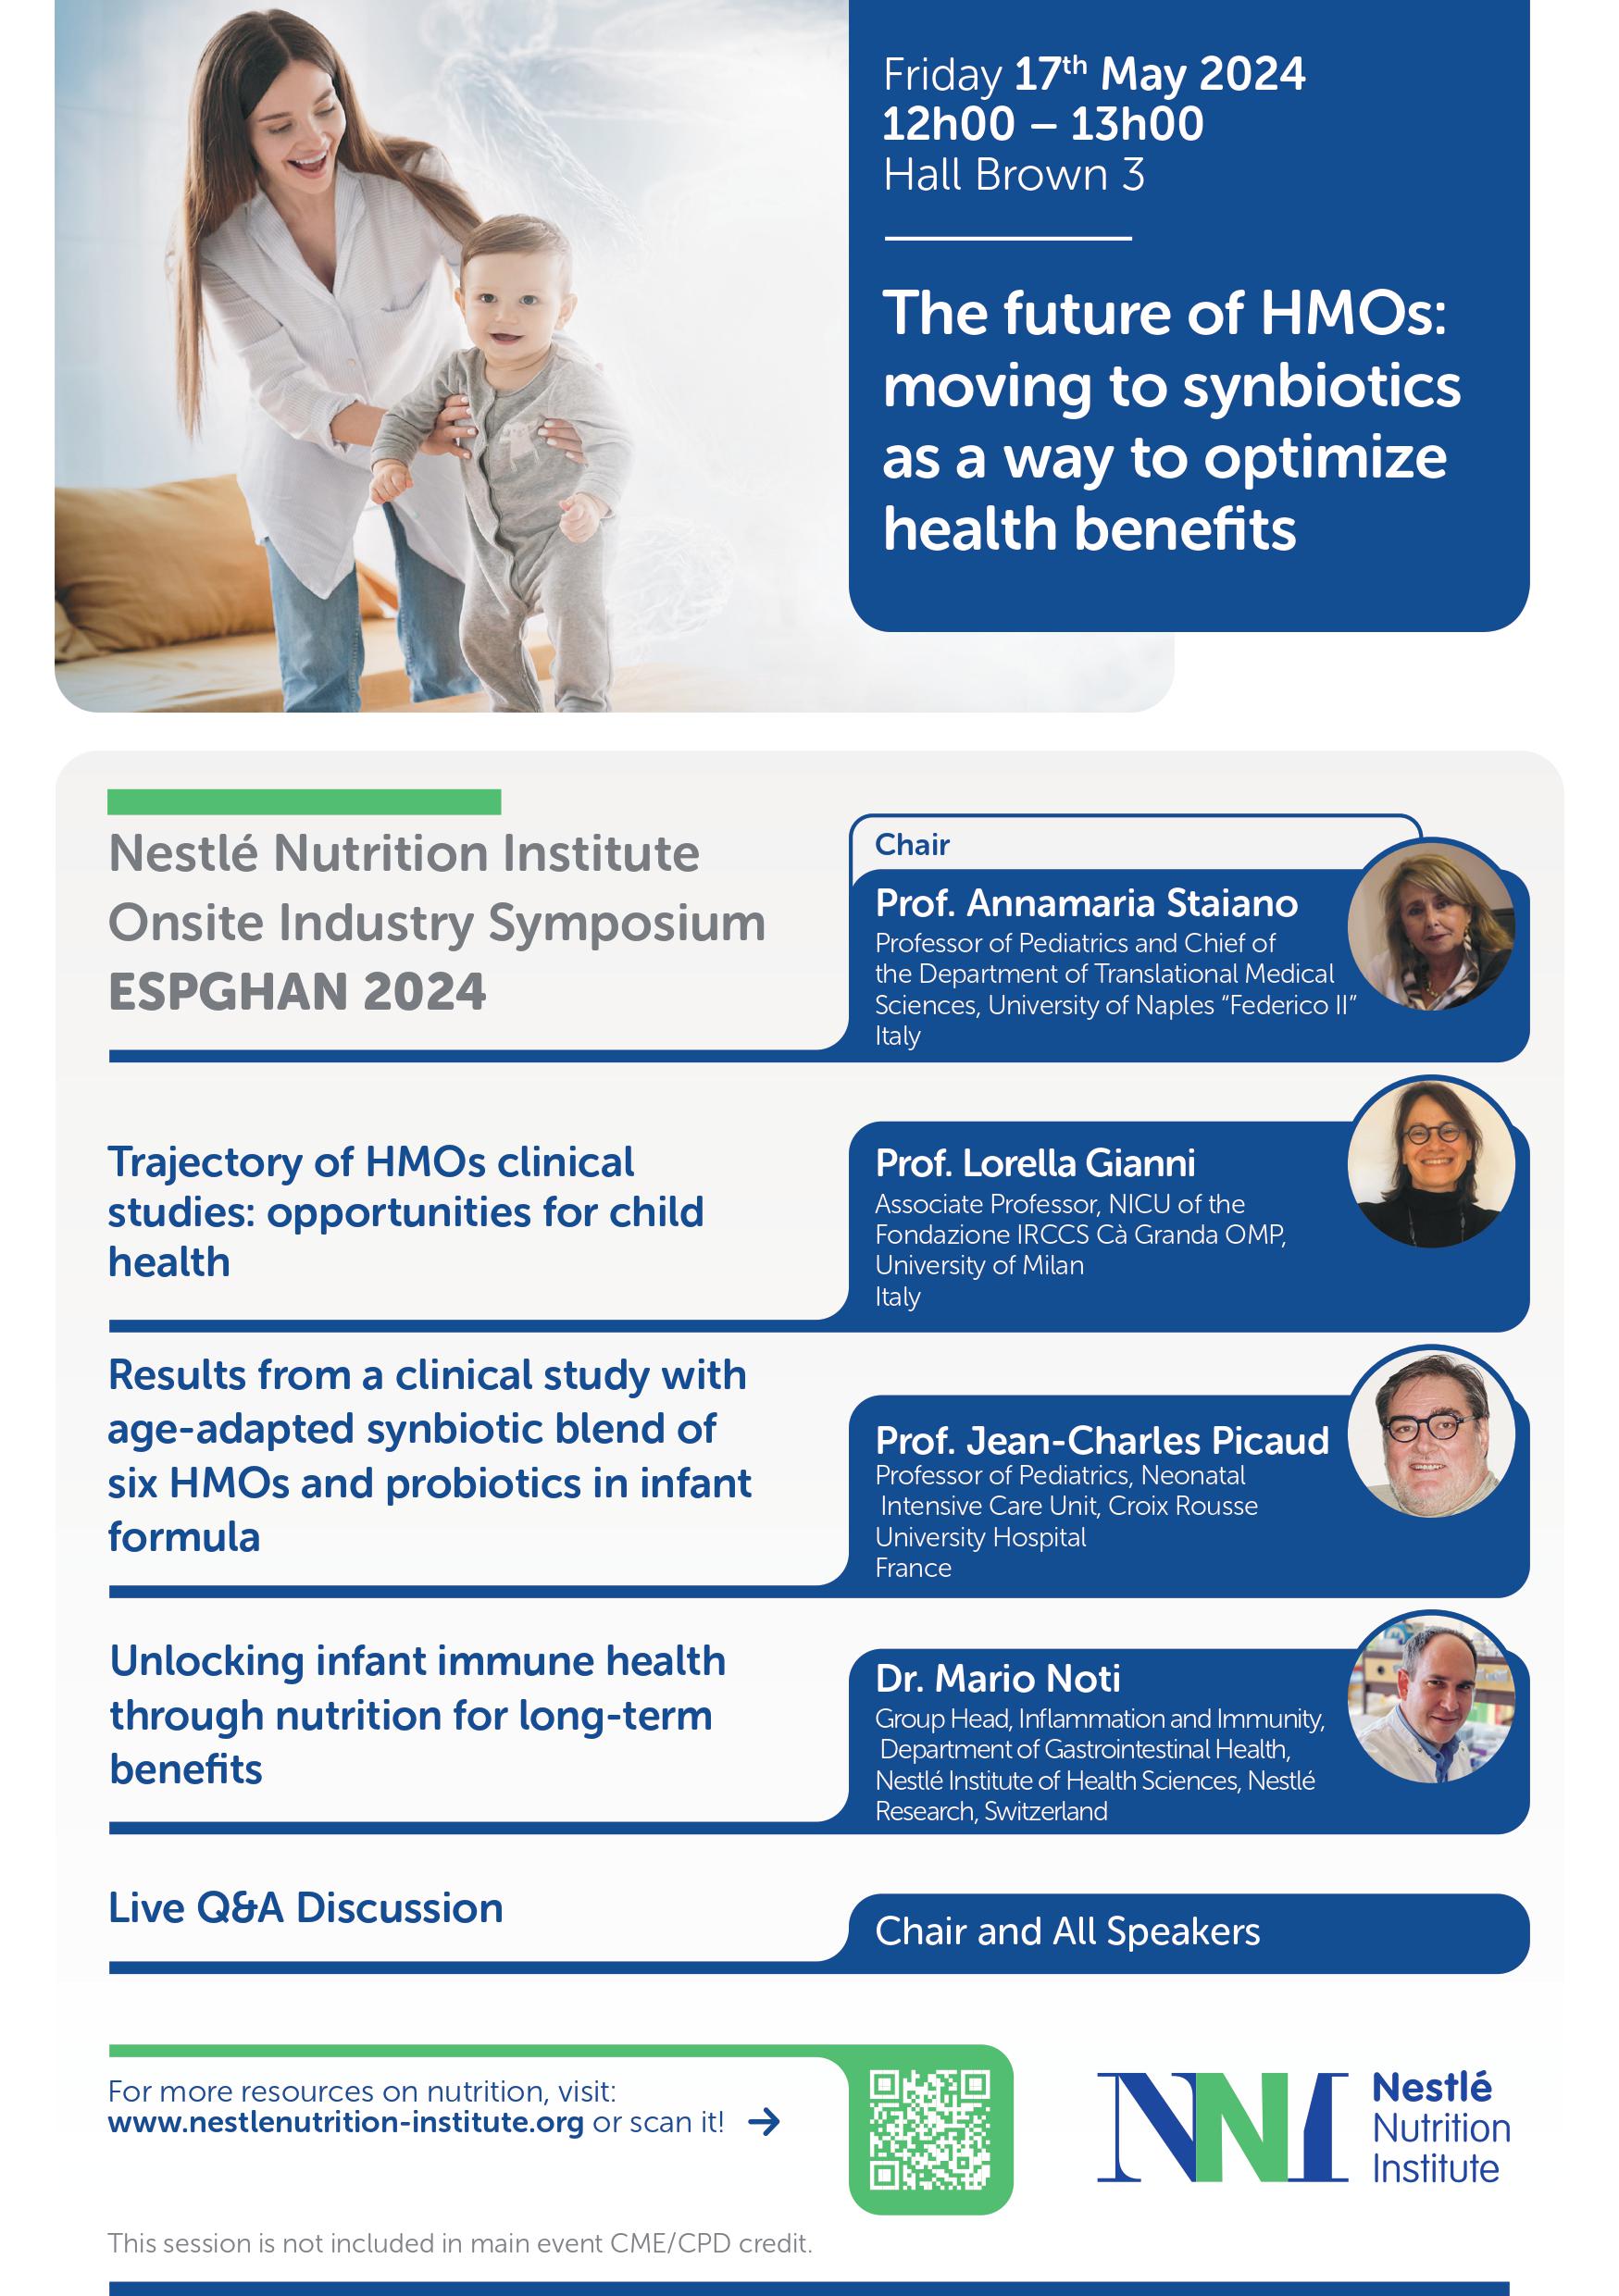 The future of HMOs: moving to synbiotics as a way to optimize health benefits